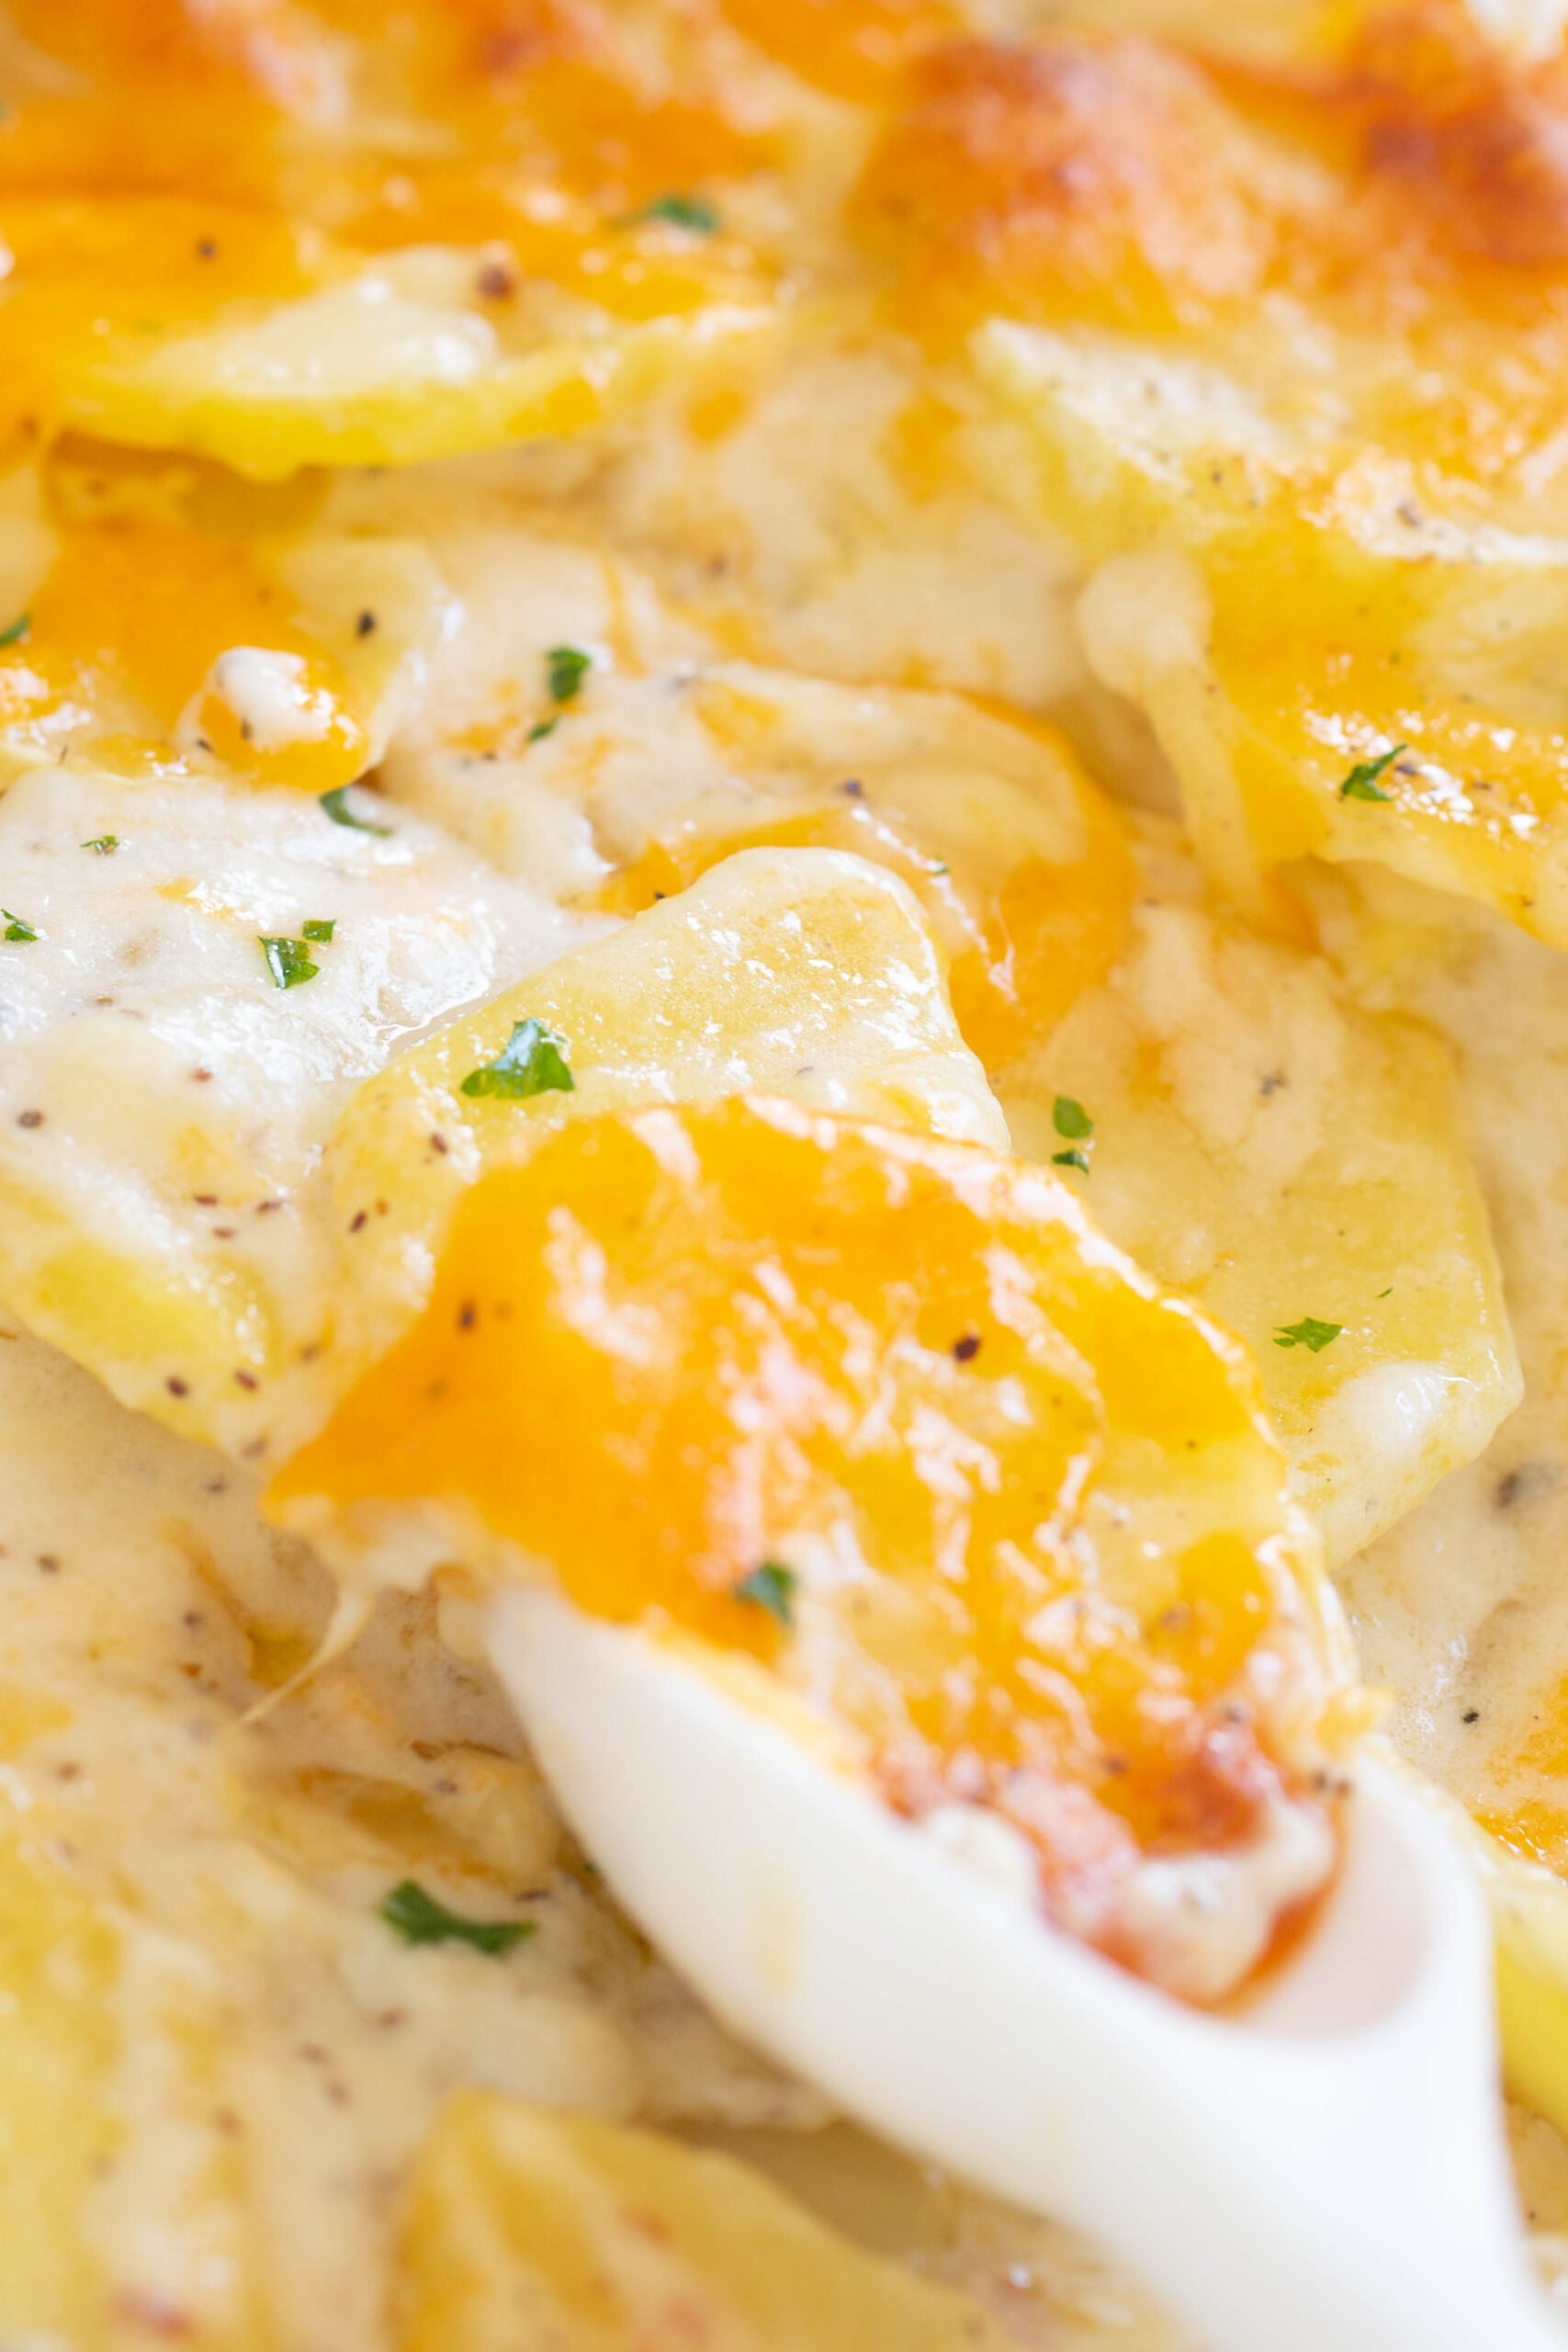 spooning cheesy scalloped potatoes from a dish. creamy and topped with green parsley